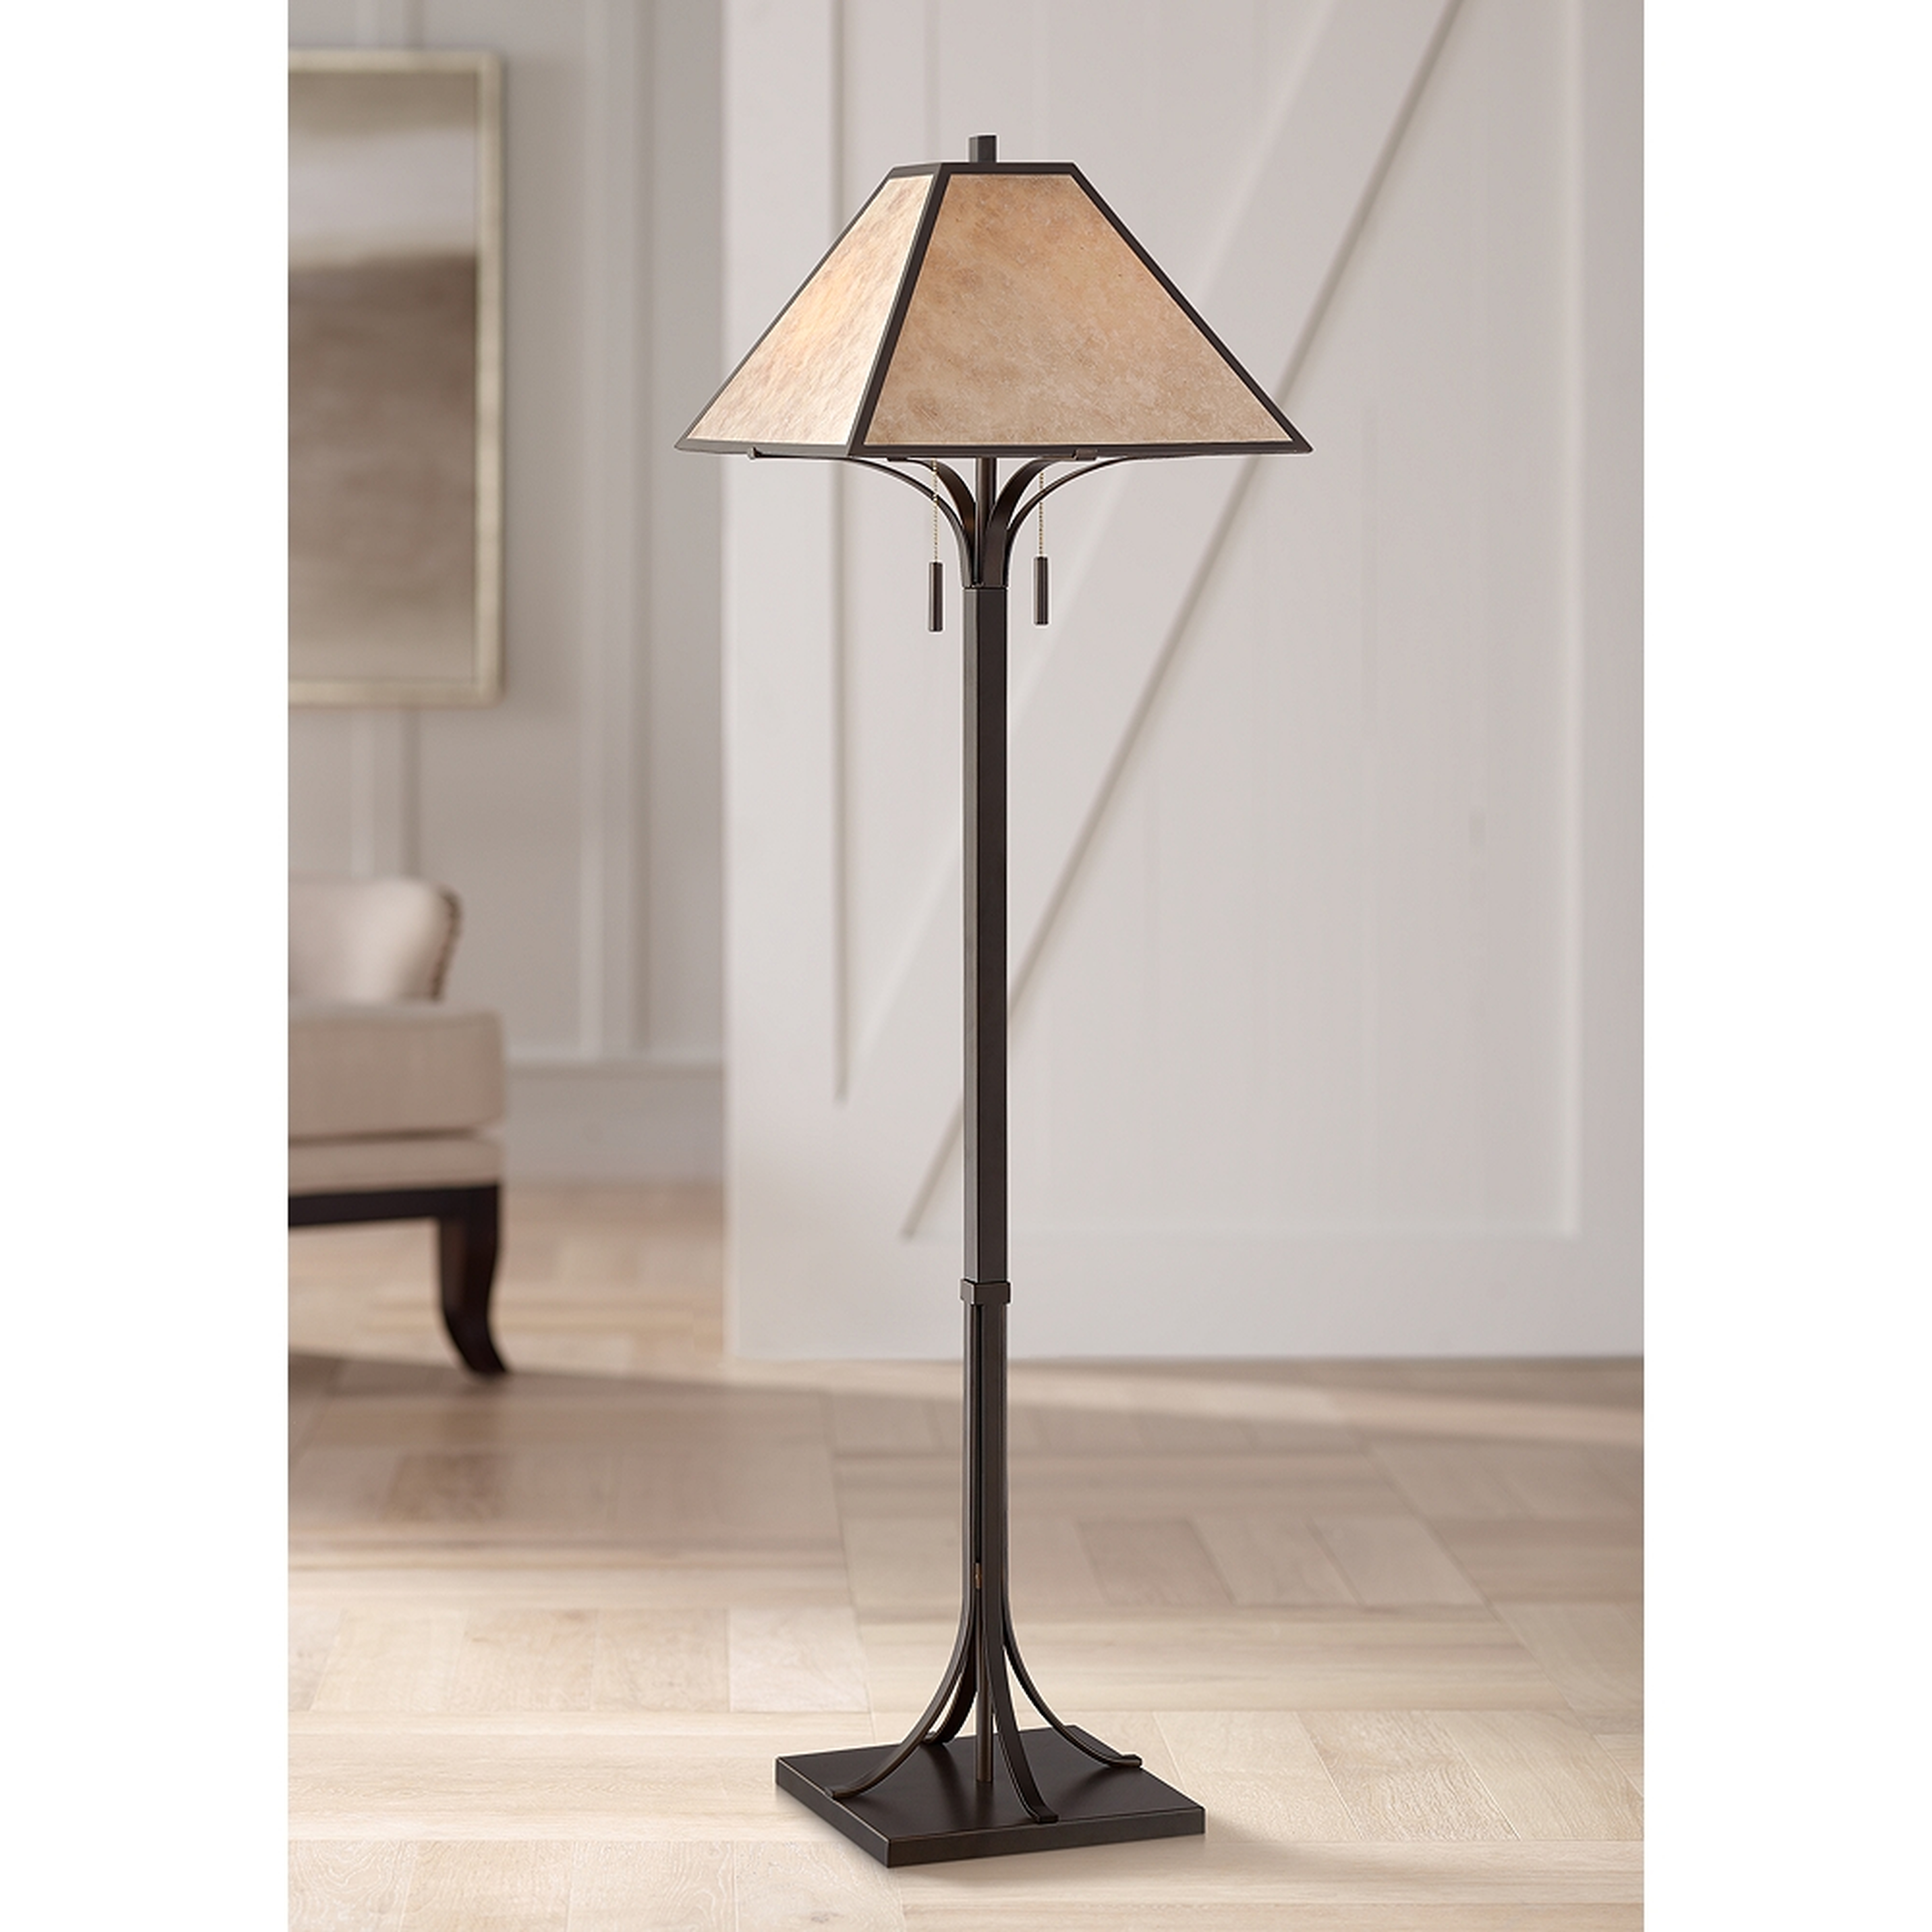 Duarte Light Mica Shade Oil-Rubbed Bronze Floor Lamp - Style # 66Y29 - Lamps Plus